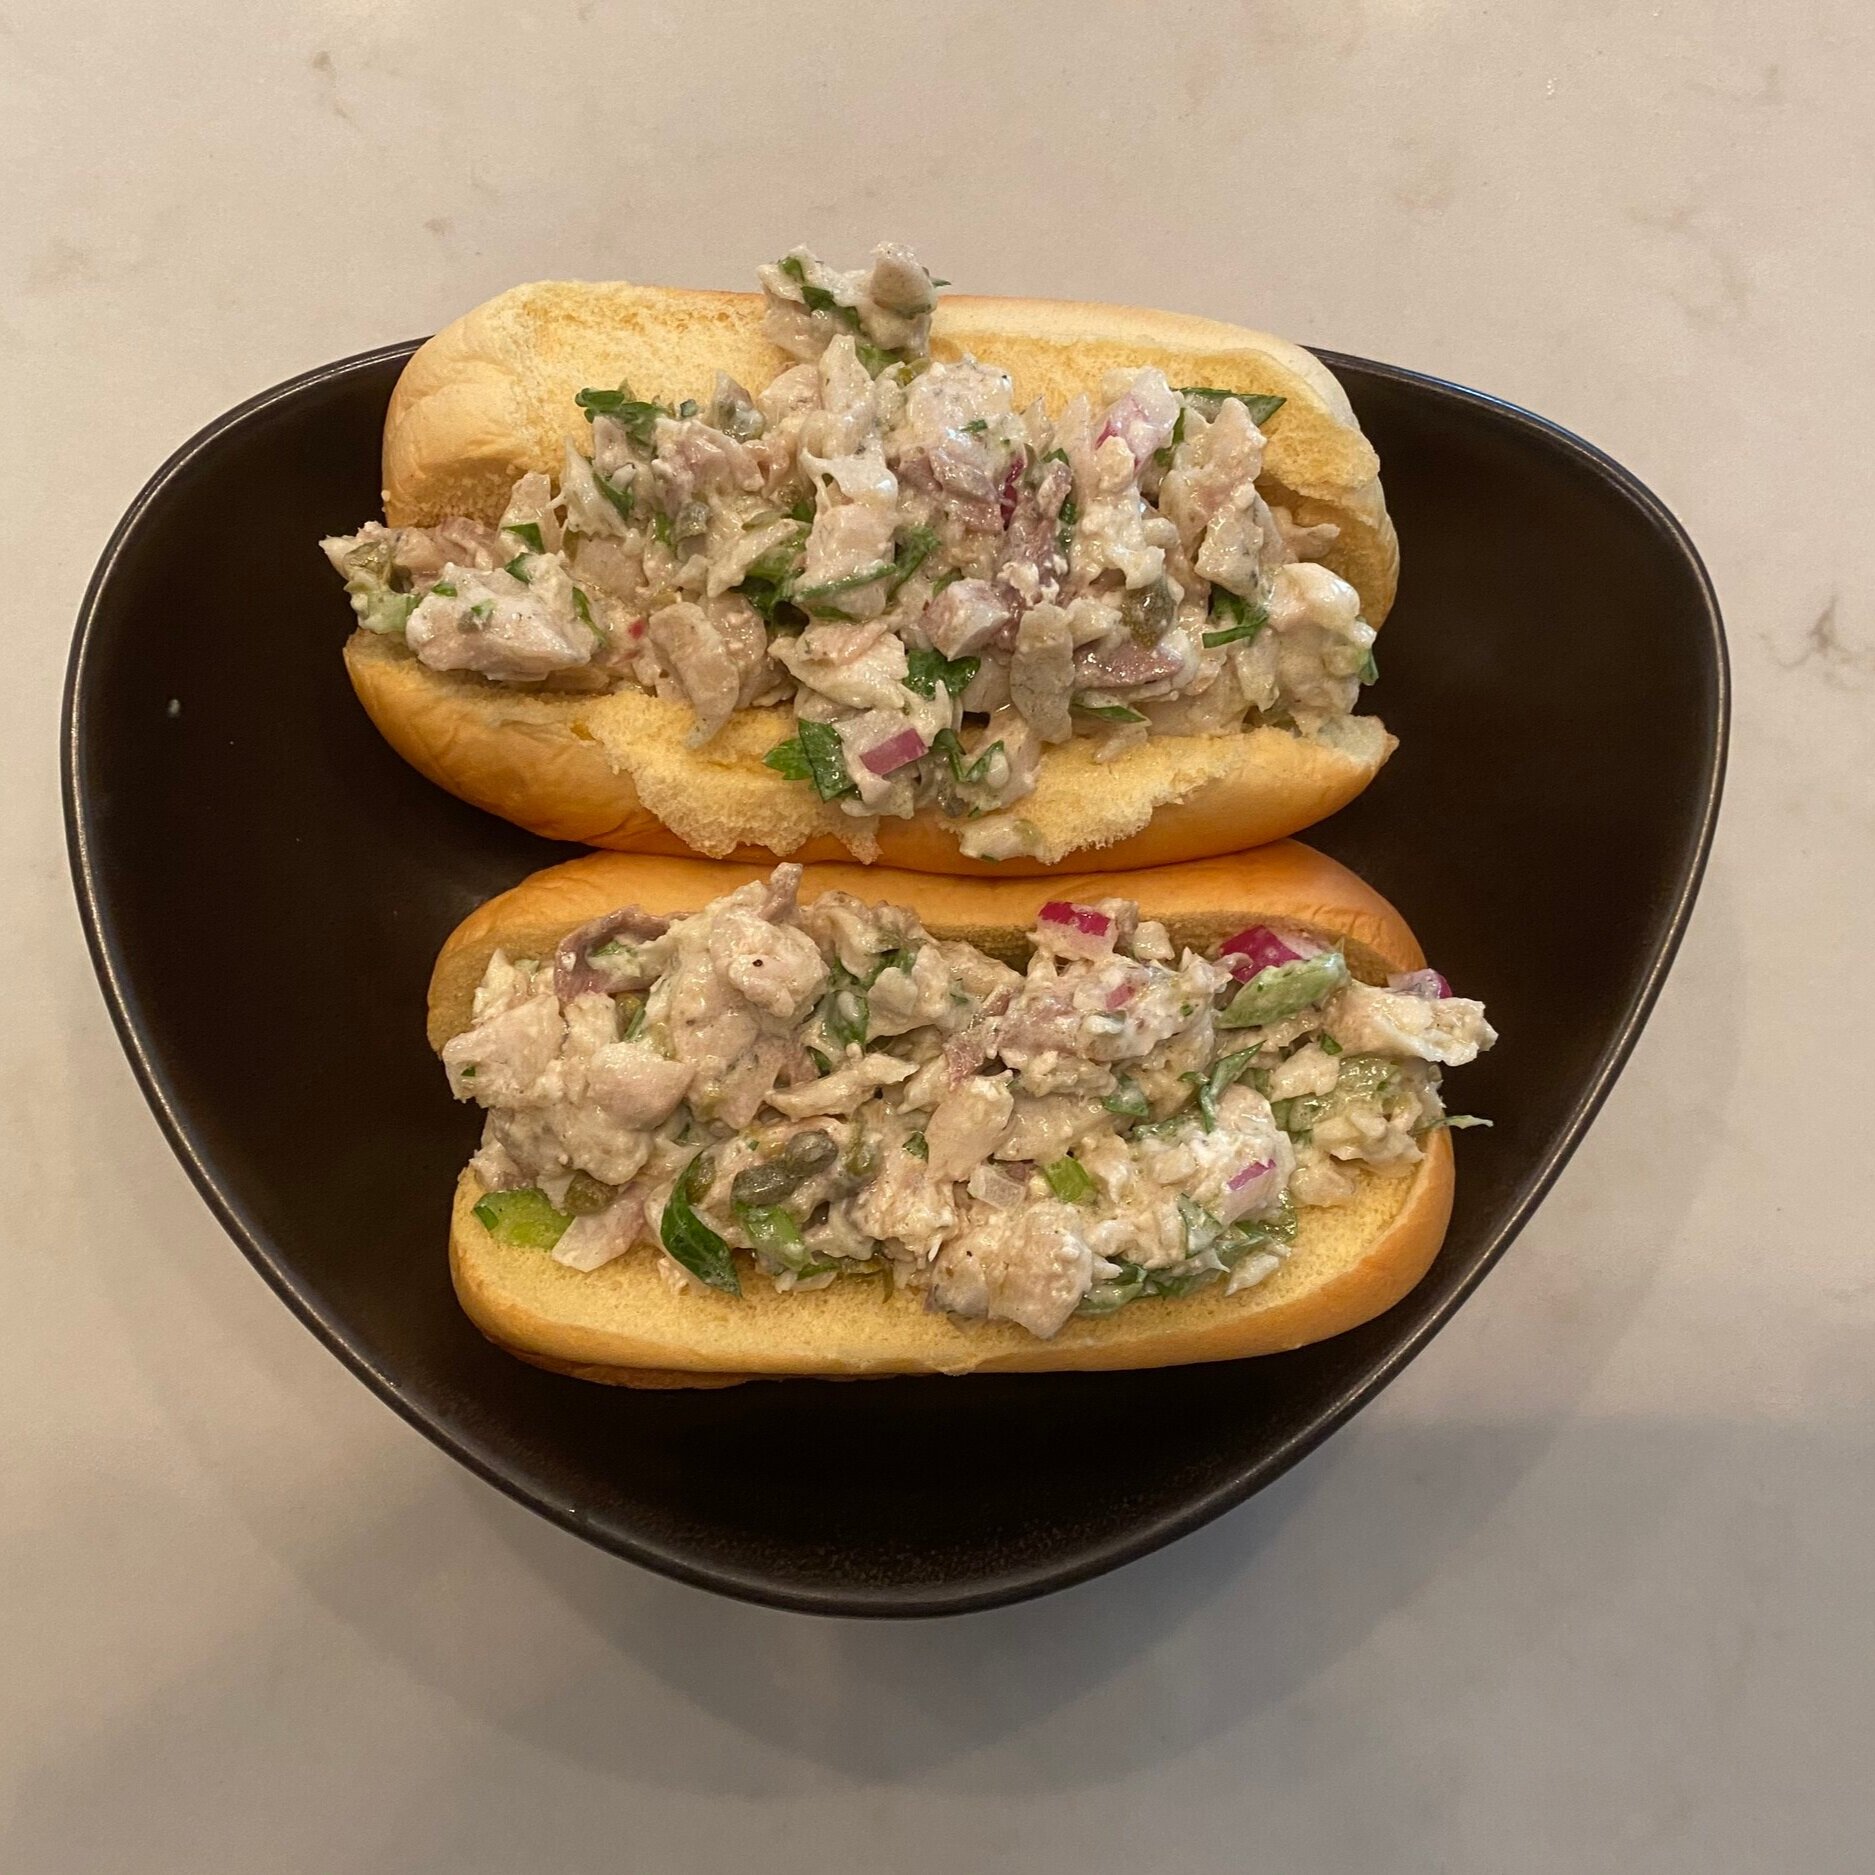 Reinvented "Lobster" Roll